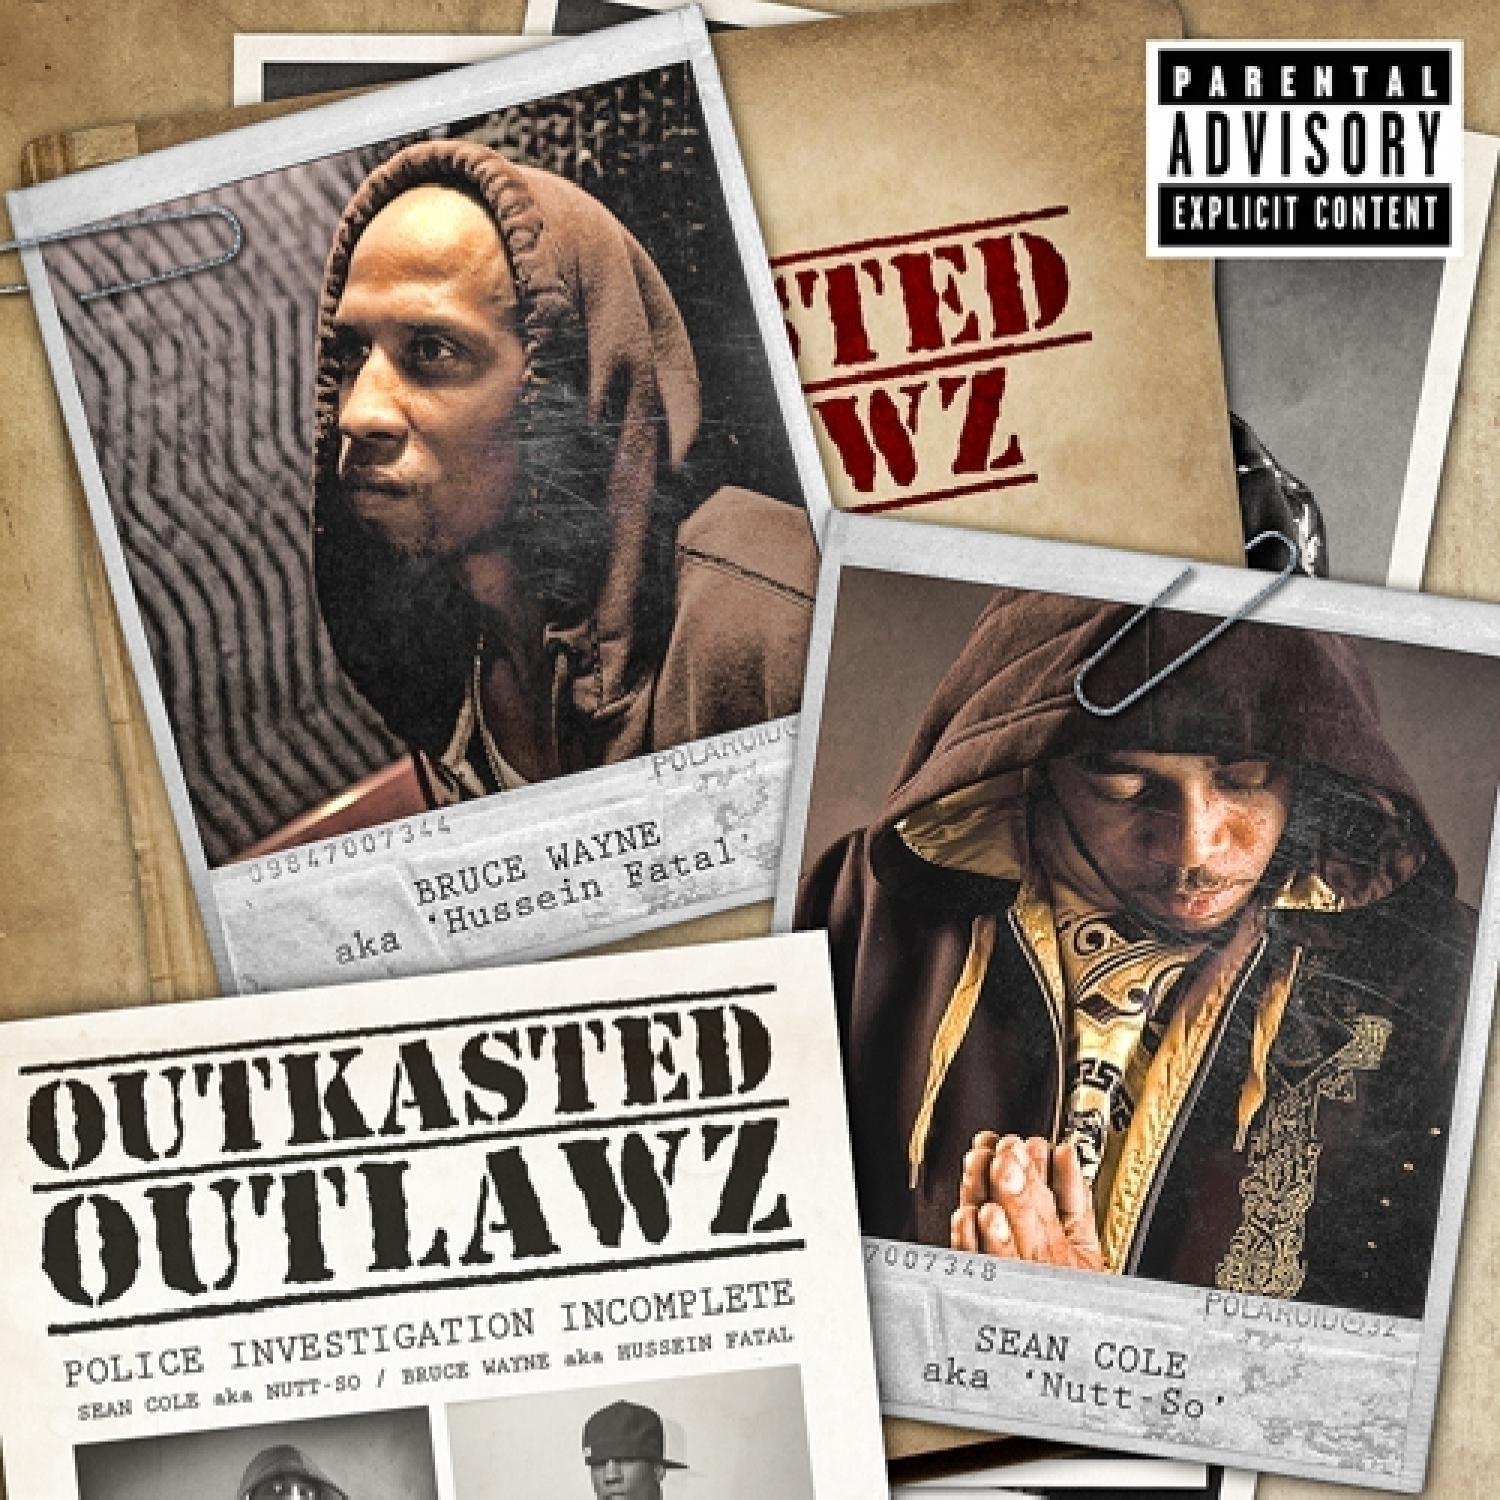 Outkasted Outlawz